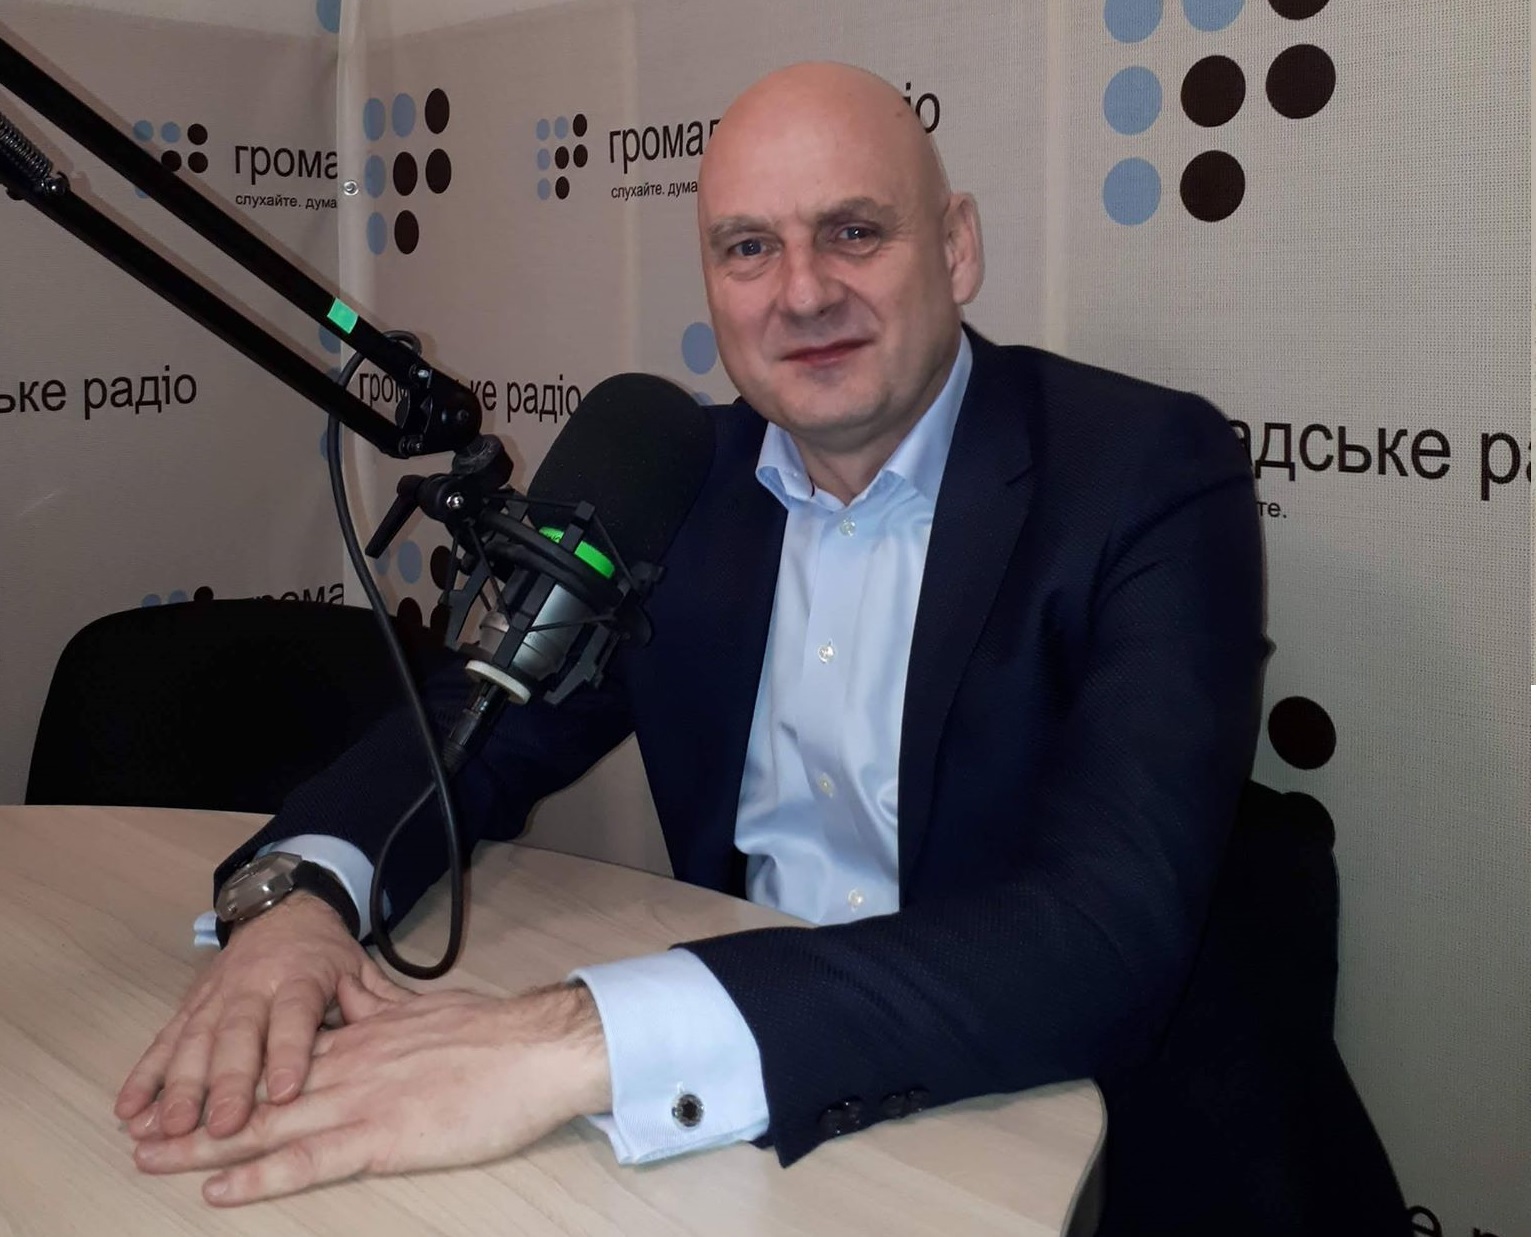 Ukraine is a fantastic opportunity for investment – Thomas Sillesen